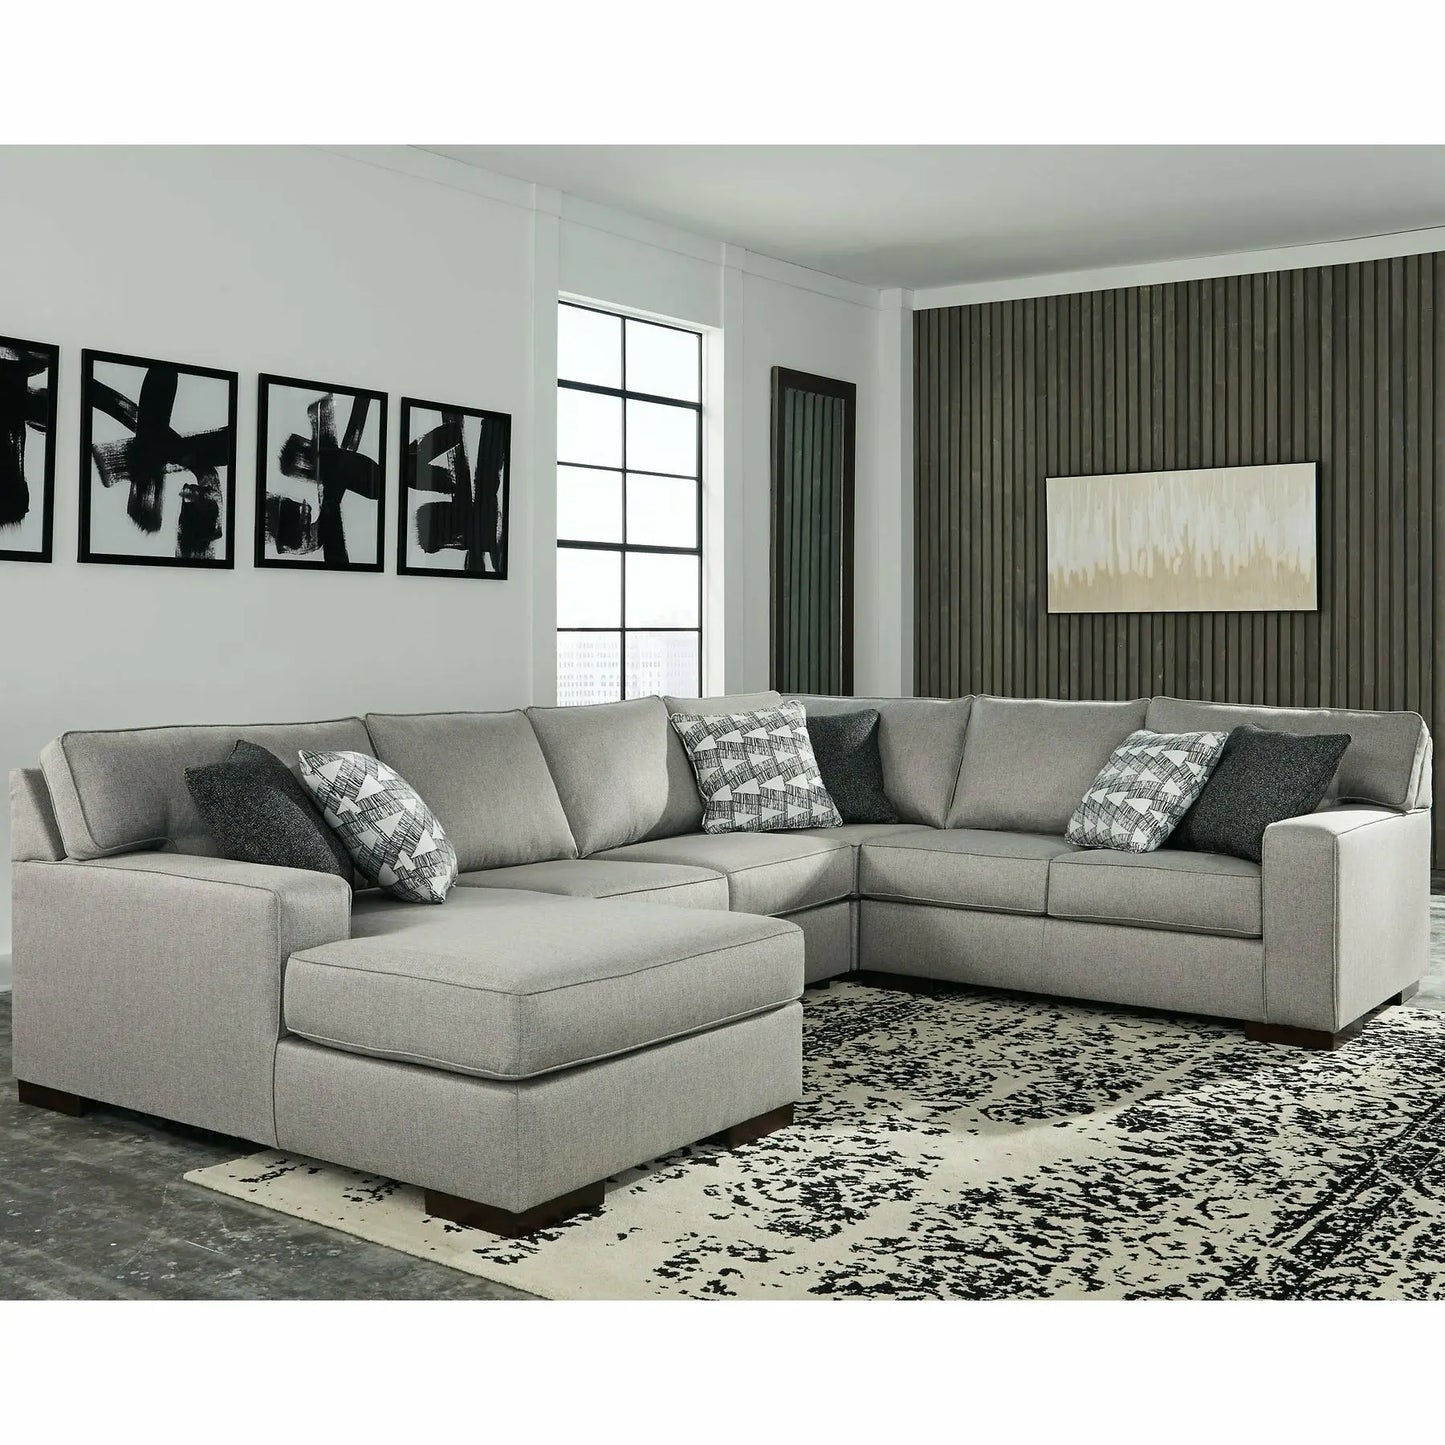 Marsing Nuvella 4-Piece Sleeper Sectional with Chaise SOFA